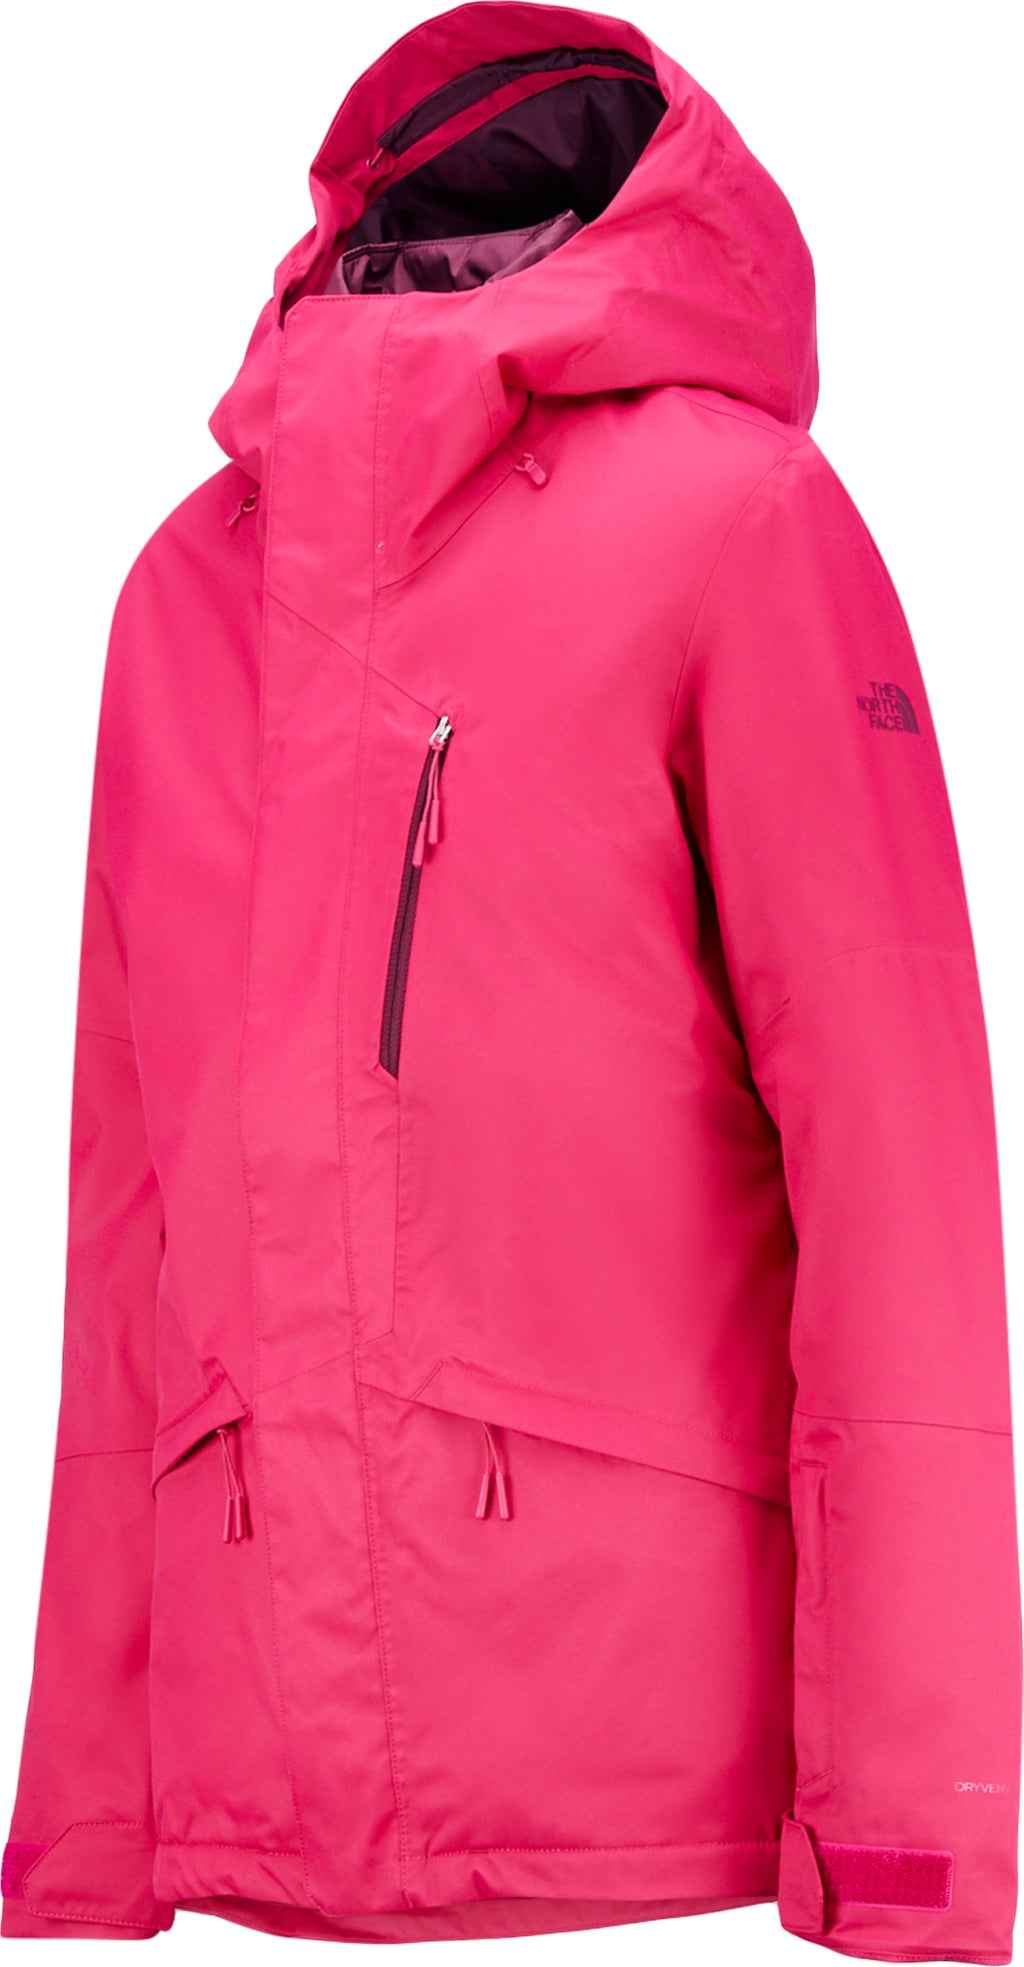 north face thermoball jacket costco